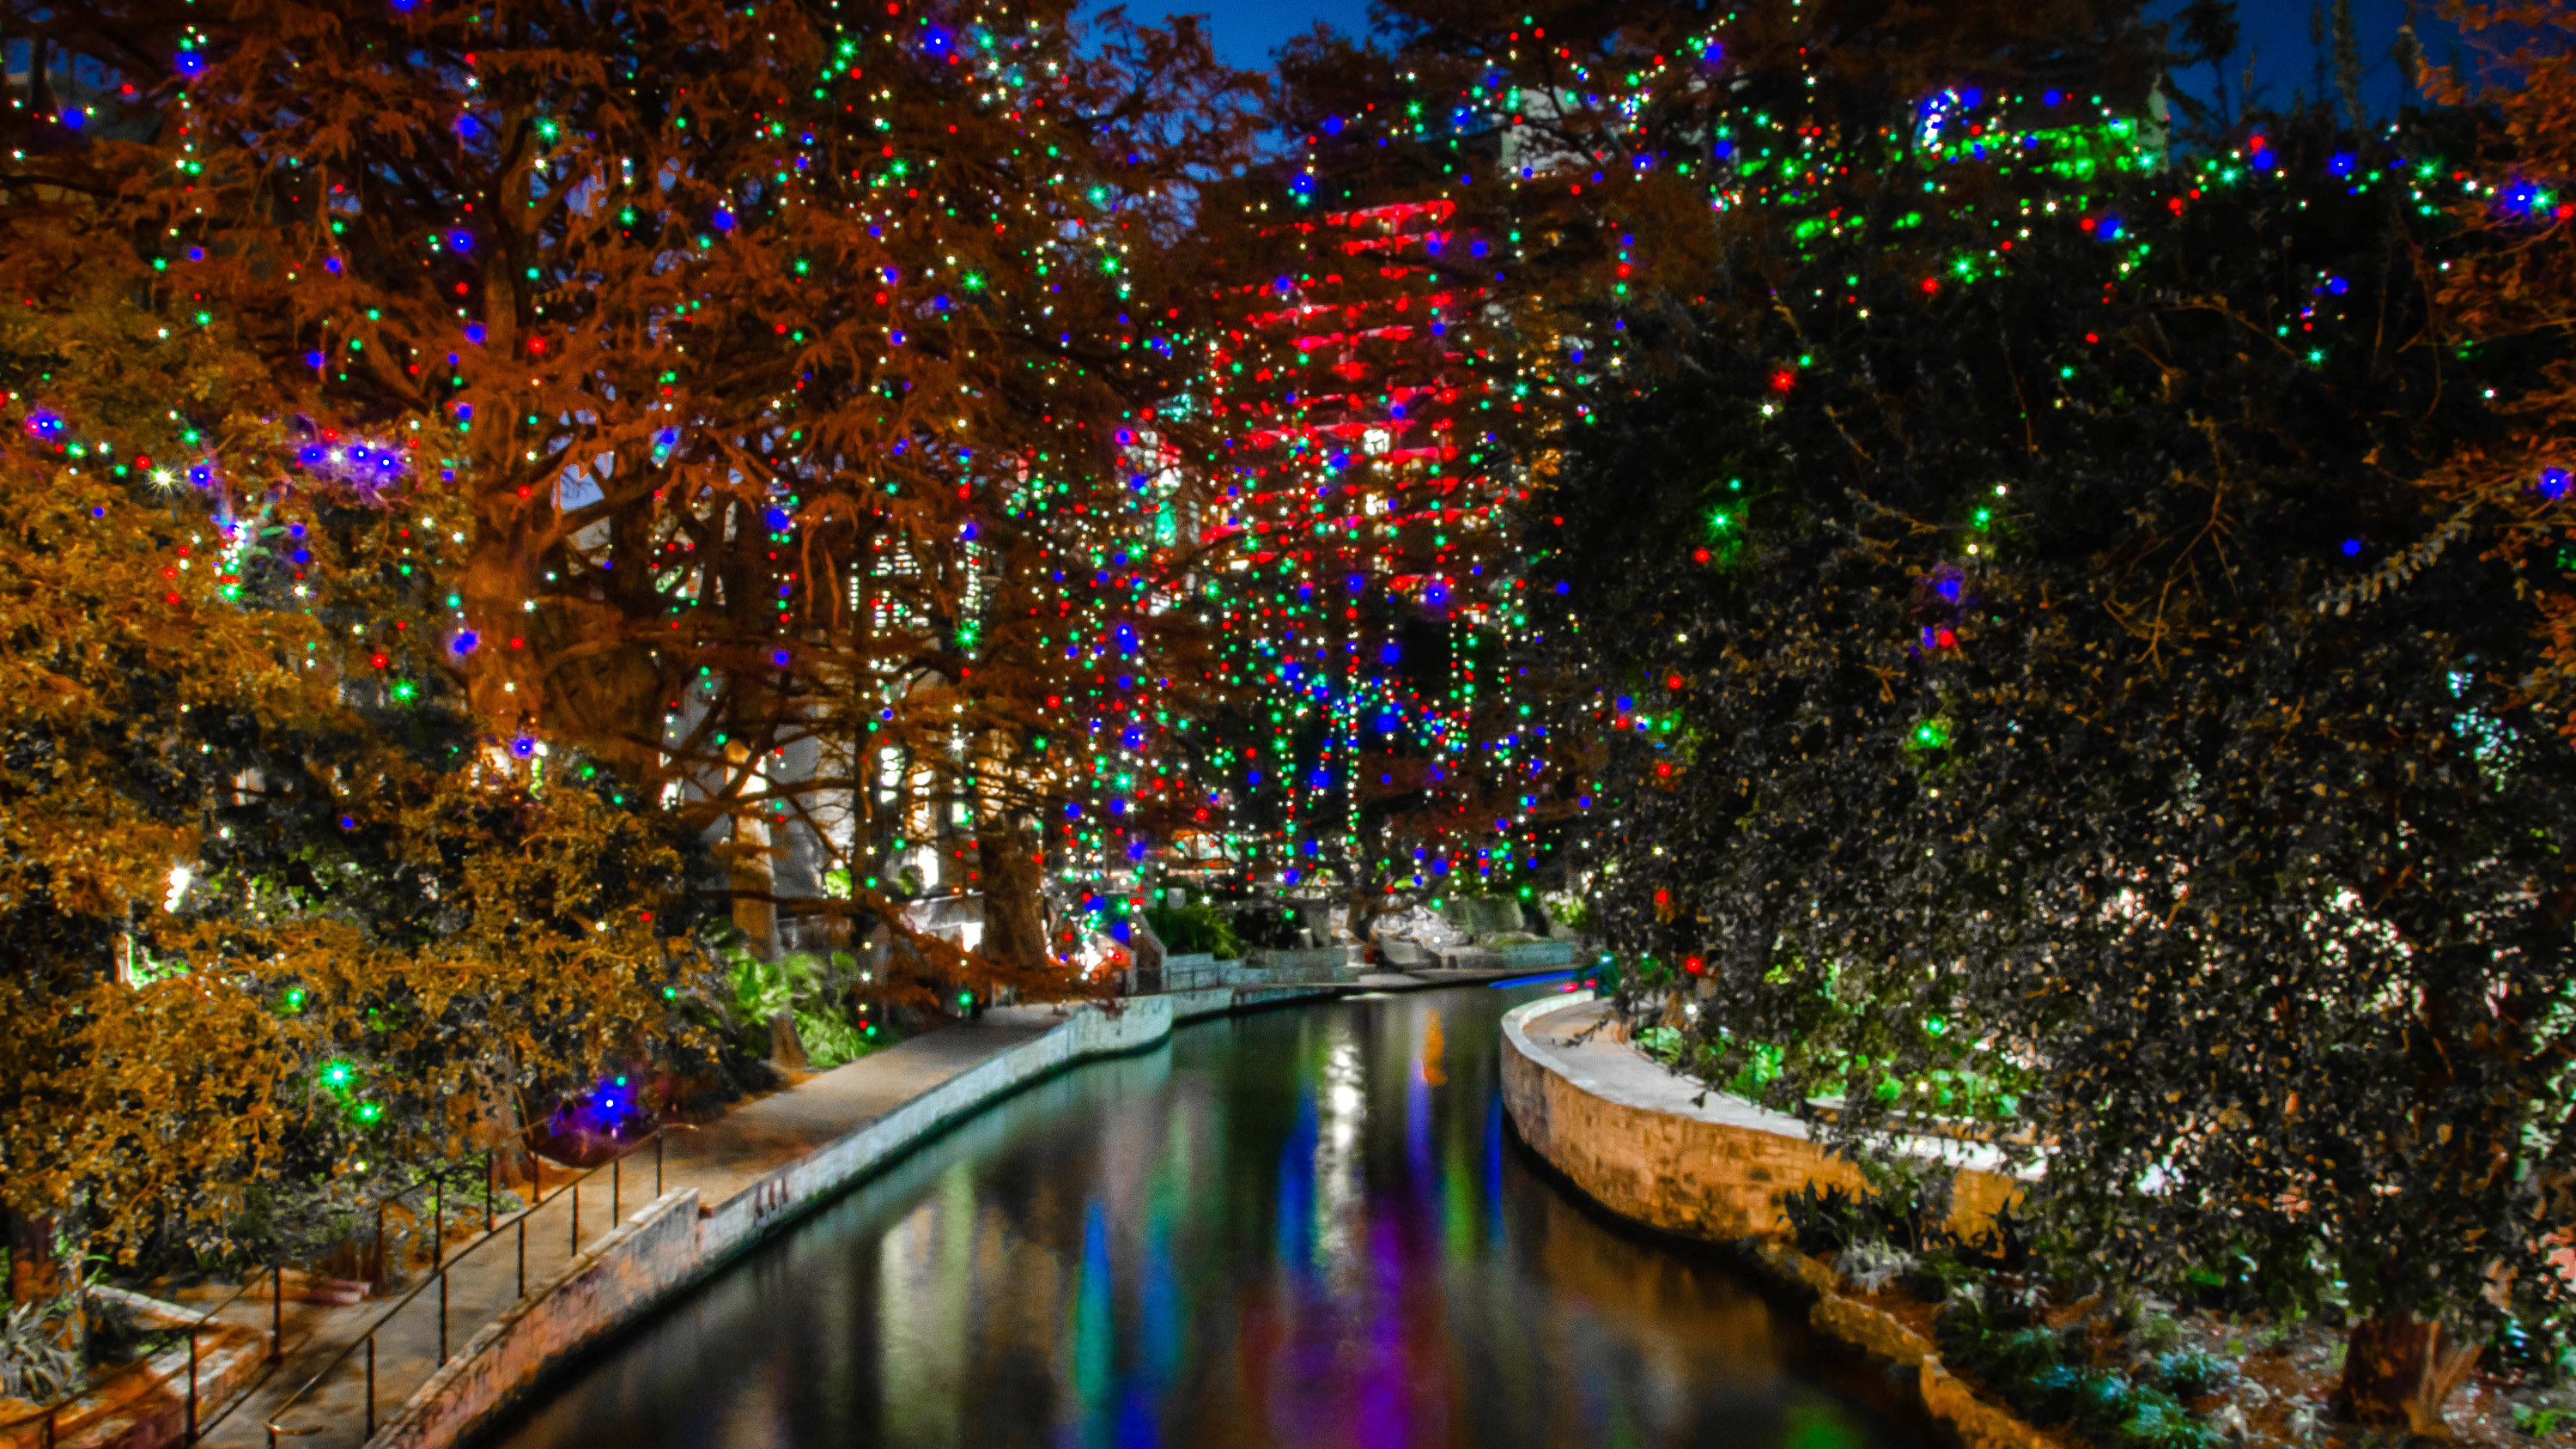 San Antonio River Walk with colorful Christmas lights decorating the trees